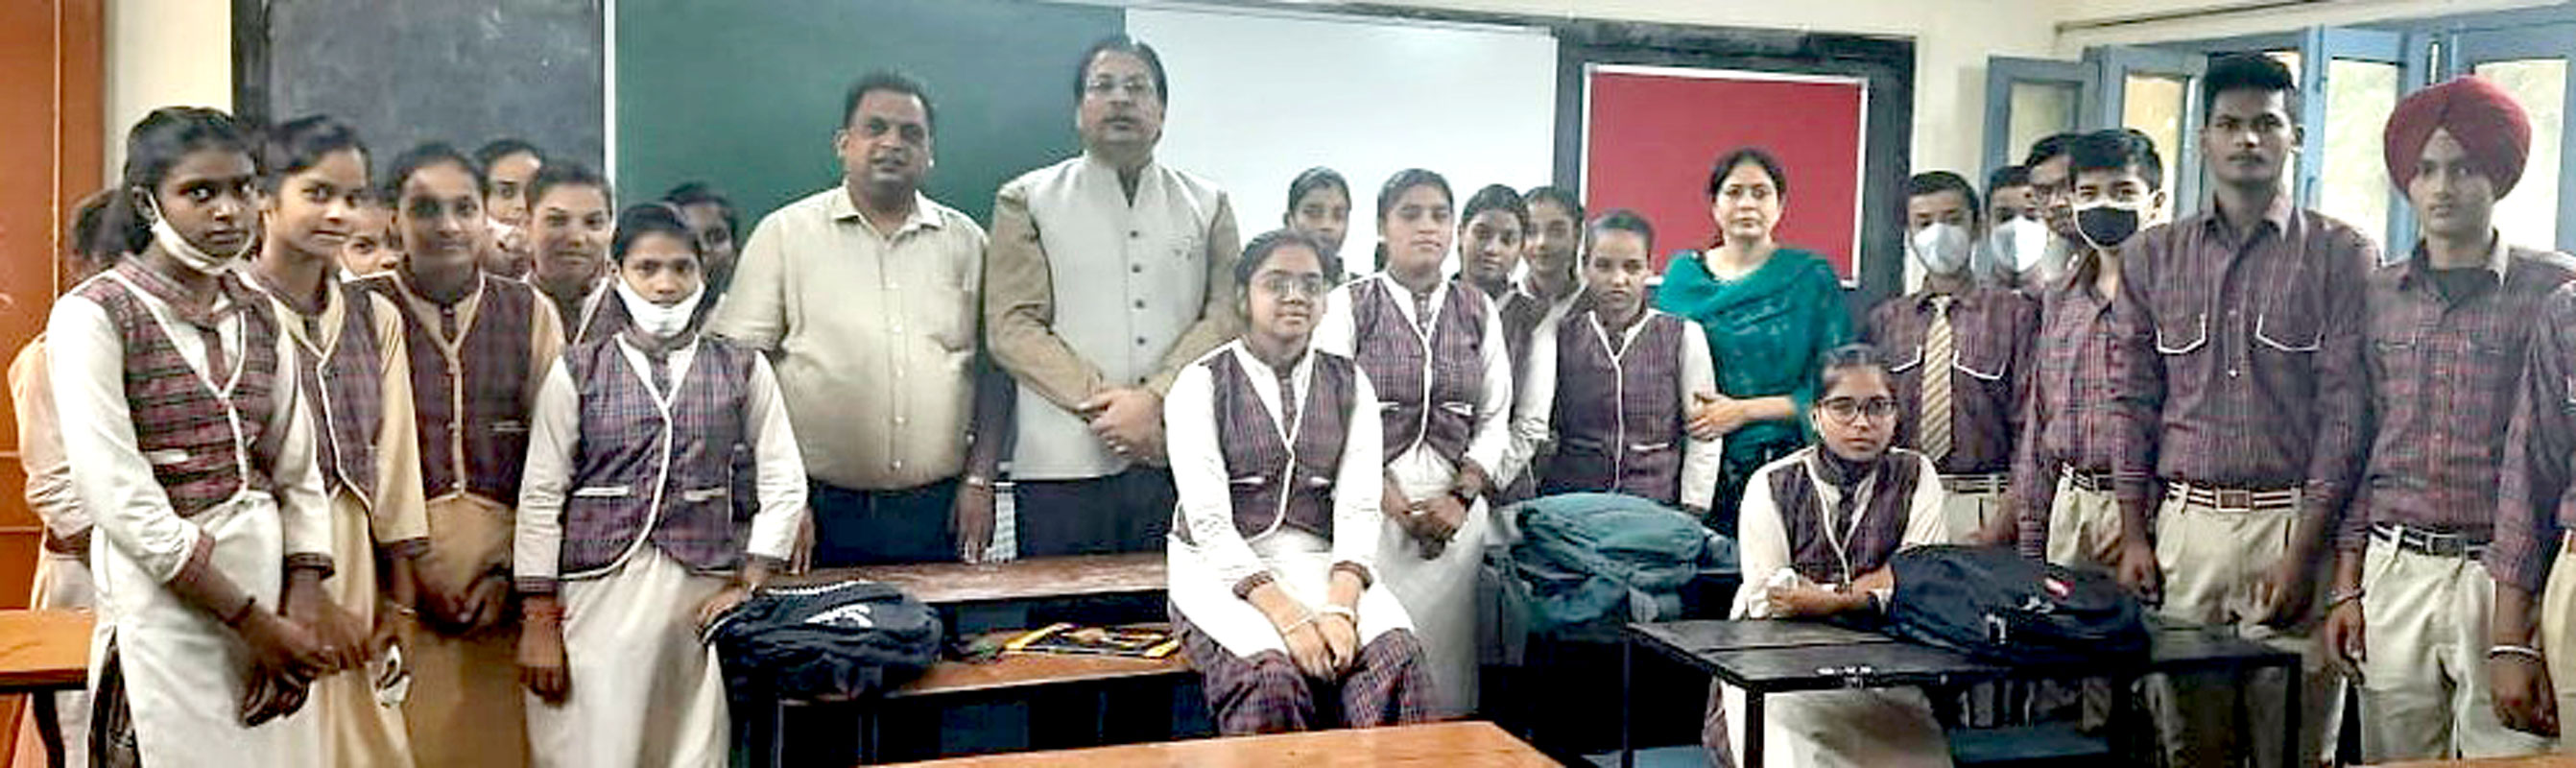 District Interact chair Manik Raj Singla with Interactors at a career counselling camp.